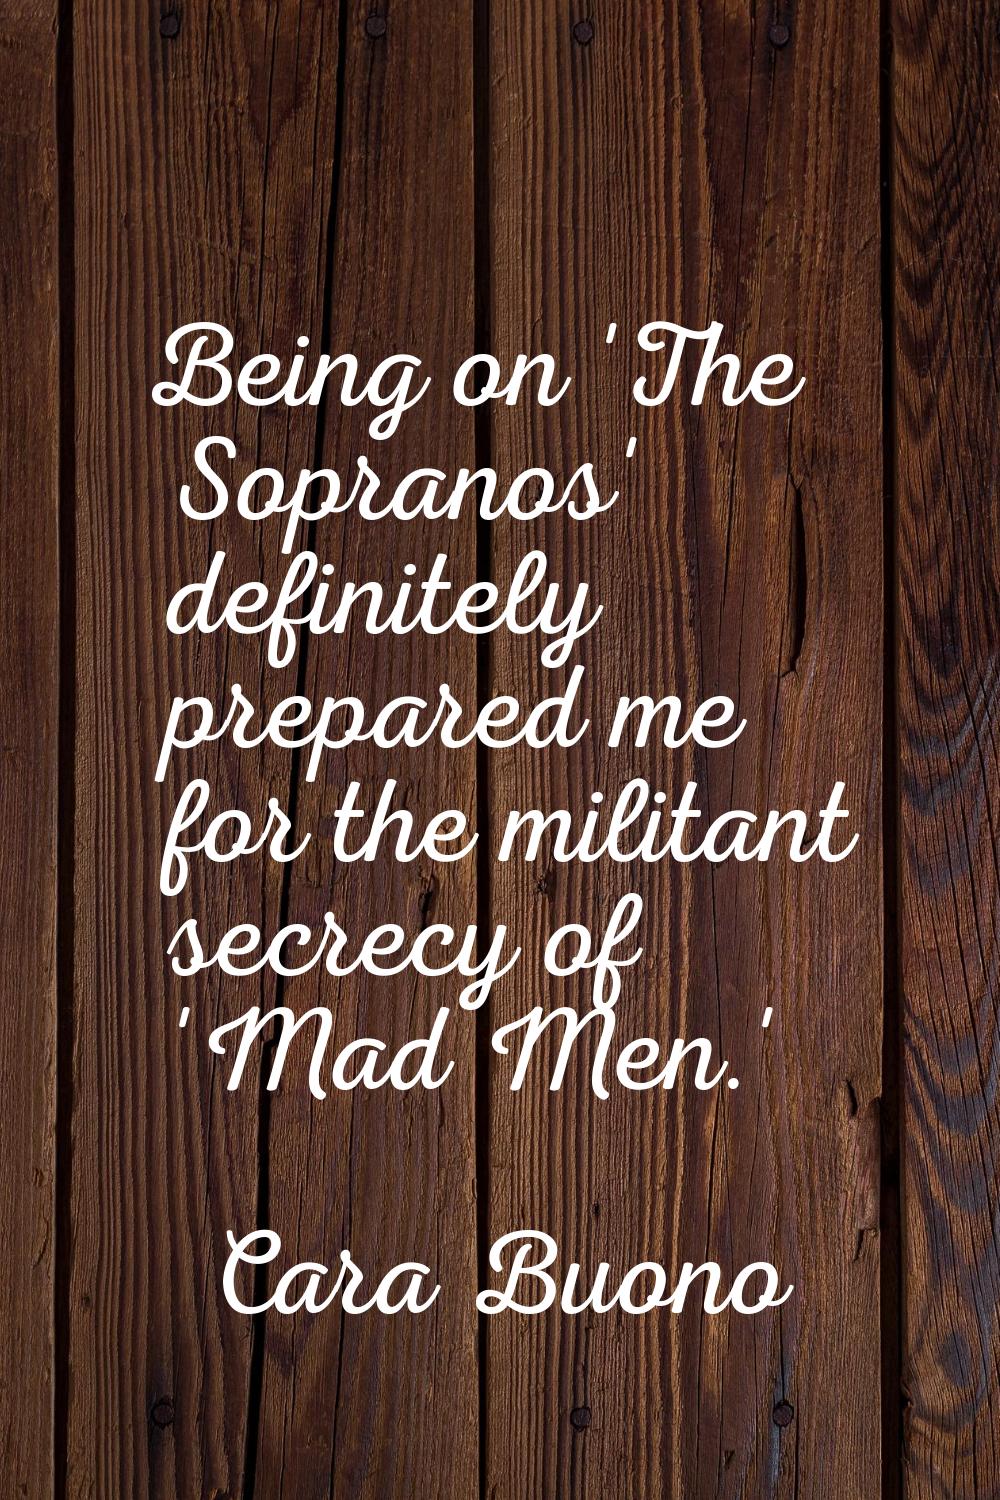 Being on 'The Sopranos' definitely prepared me for the militant secrecy of 'Mad Men.'